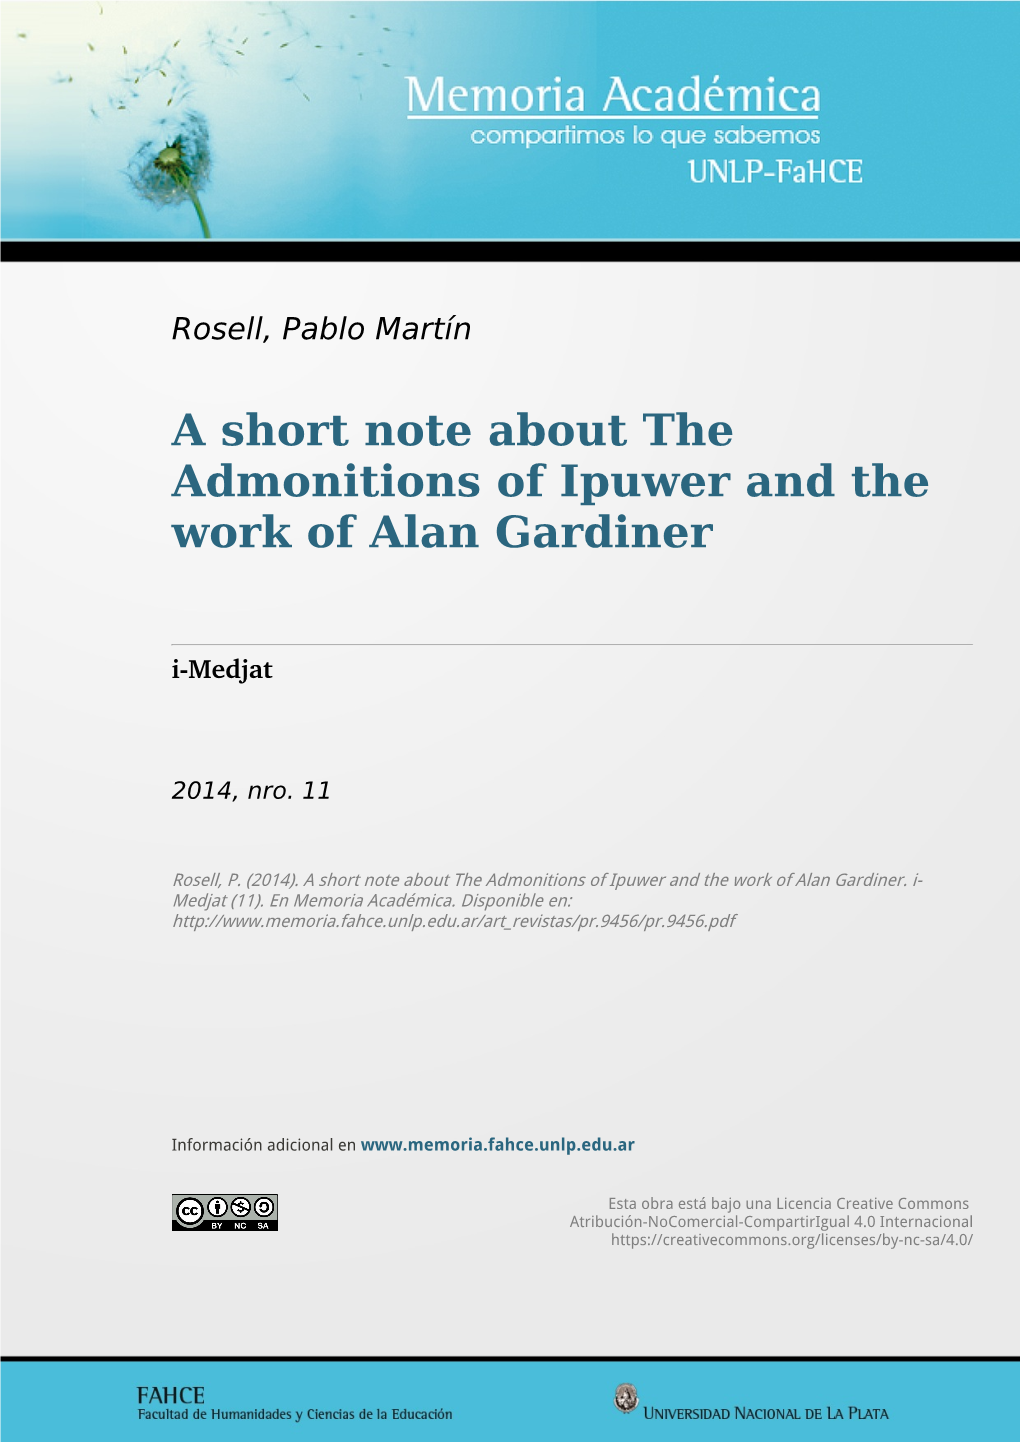 A Short Note About the Admonitions of Ipuwer and the Work of Alan Gardiner